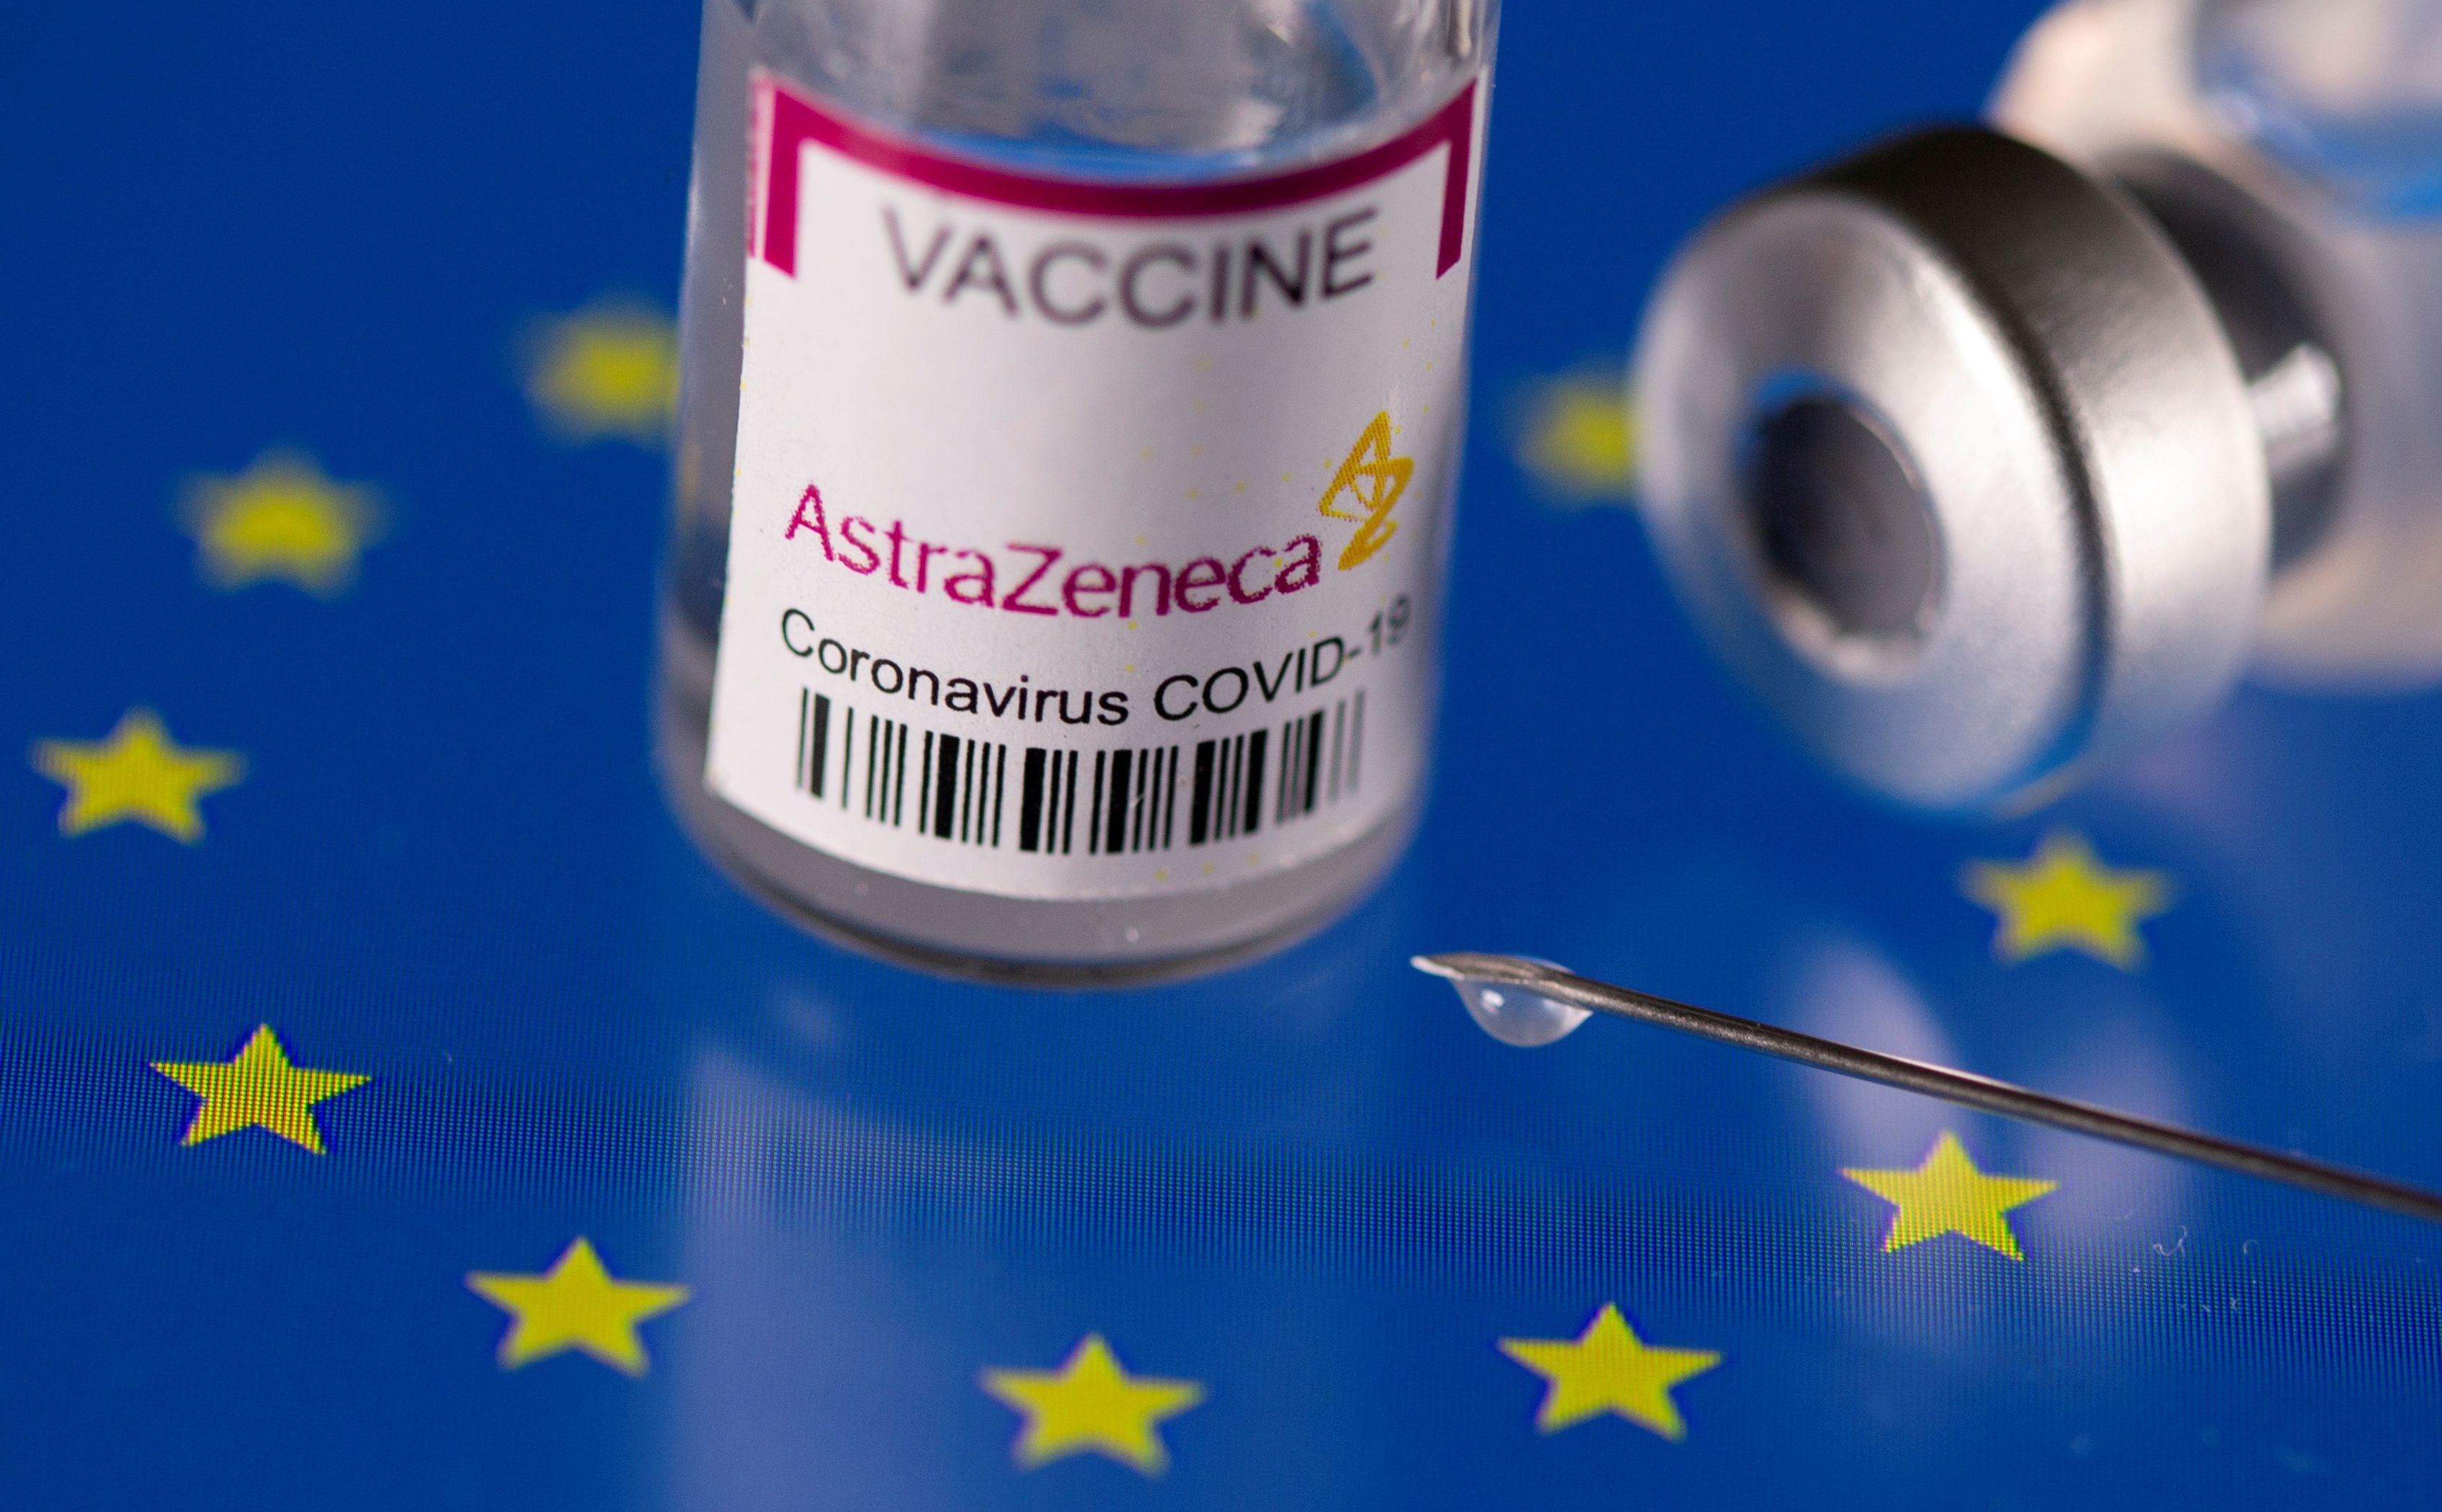 FILE PHOTO: Vials labelled "AstraZeneca coronavirus disease (COVID-19) vaccine" placed on displayed EU flag are seen in this illustration picture taken March 24, 2021. REUTERS/Dado Ruvic/Illustration/File Photo